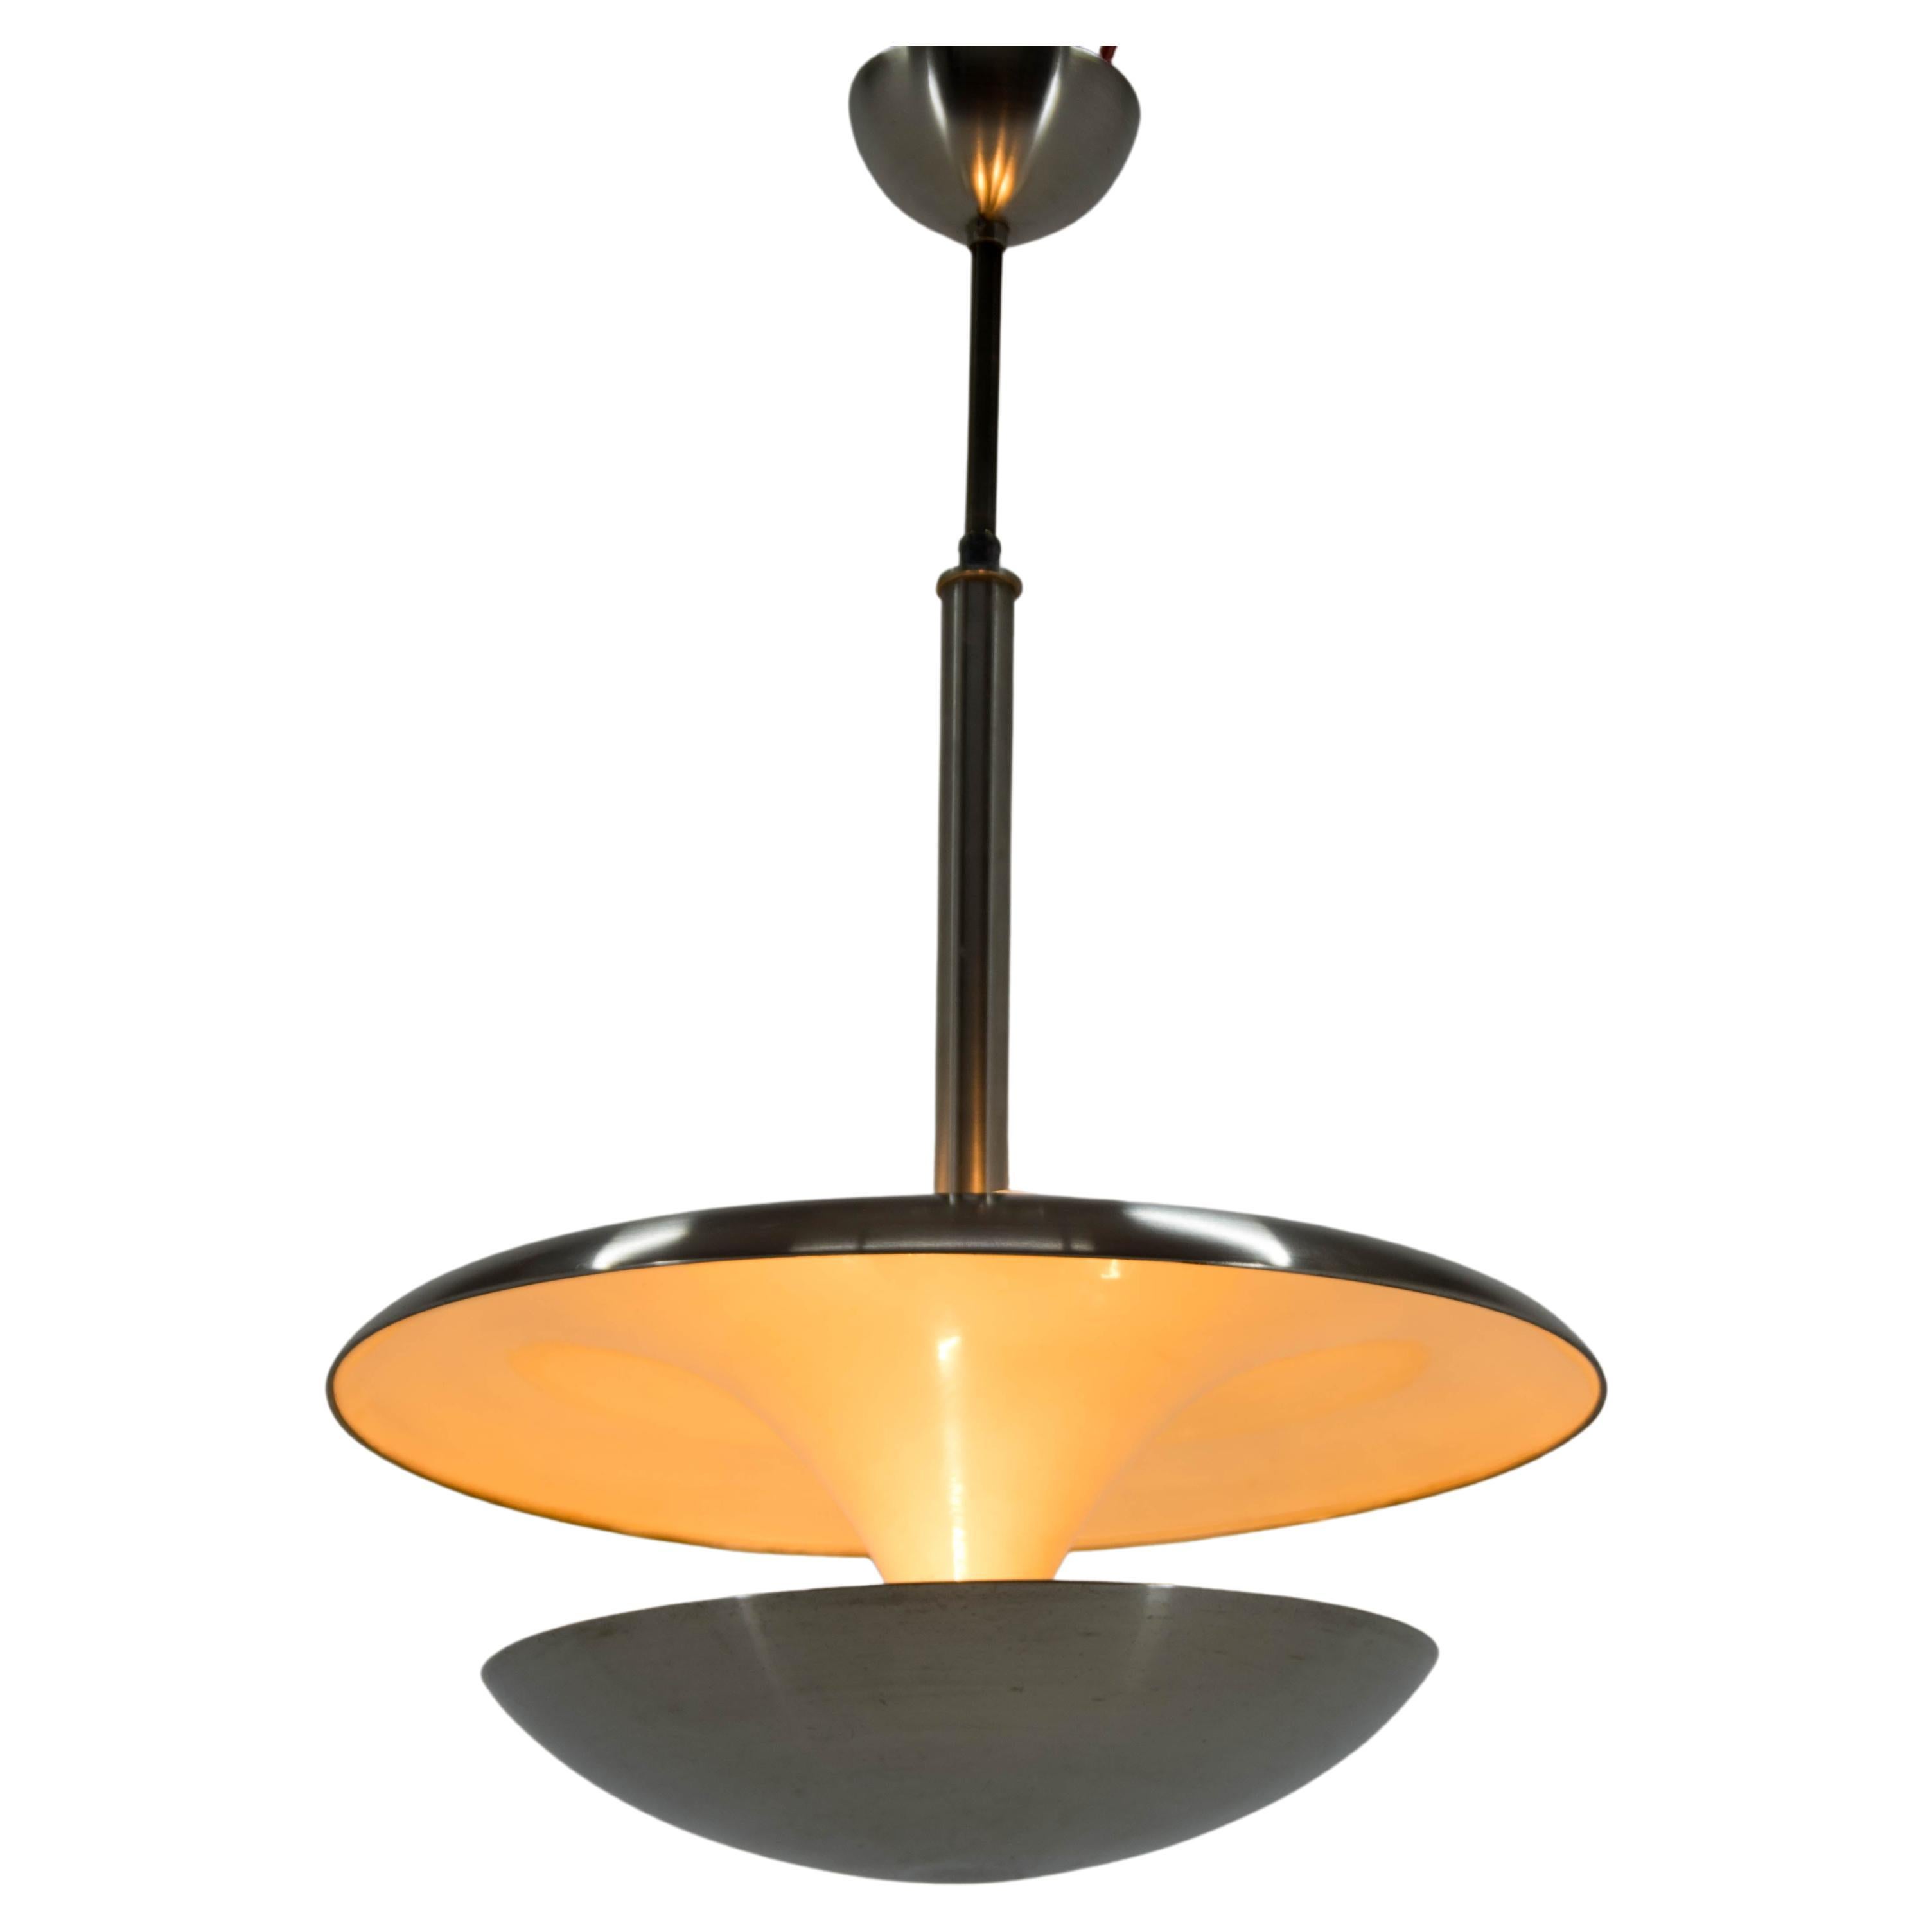 Bauhaus Chandelier by IAS, 1920s